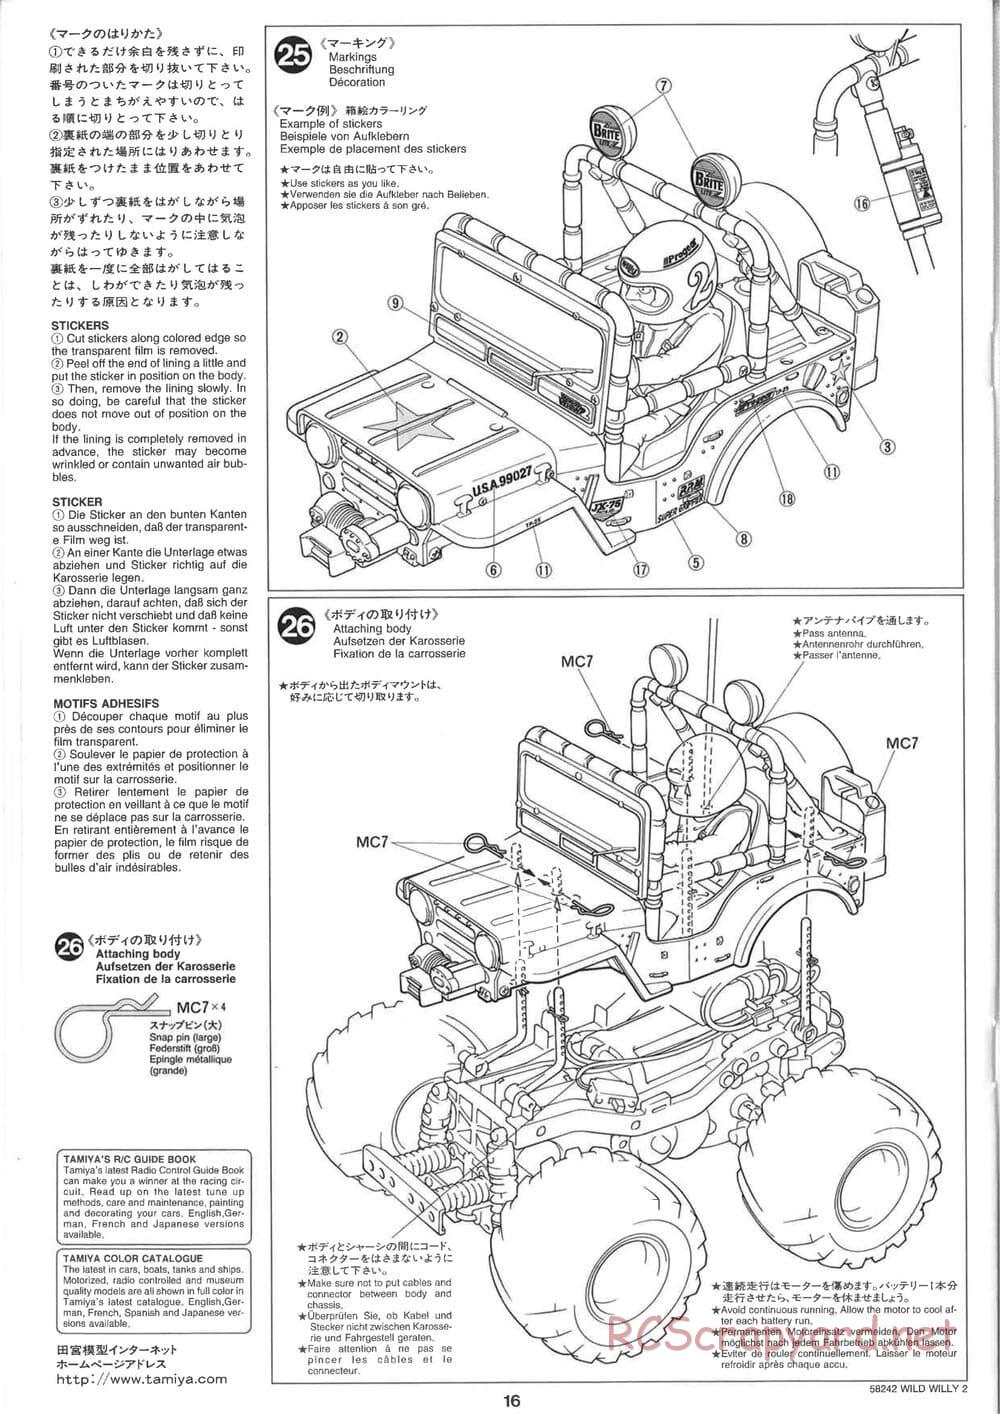 Tamiya - Wild Willy 2 - WR-02 Chassis - Manual - Page 16